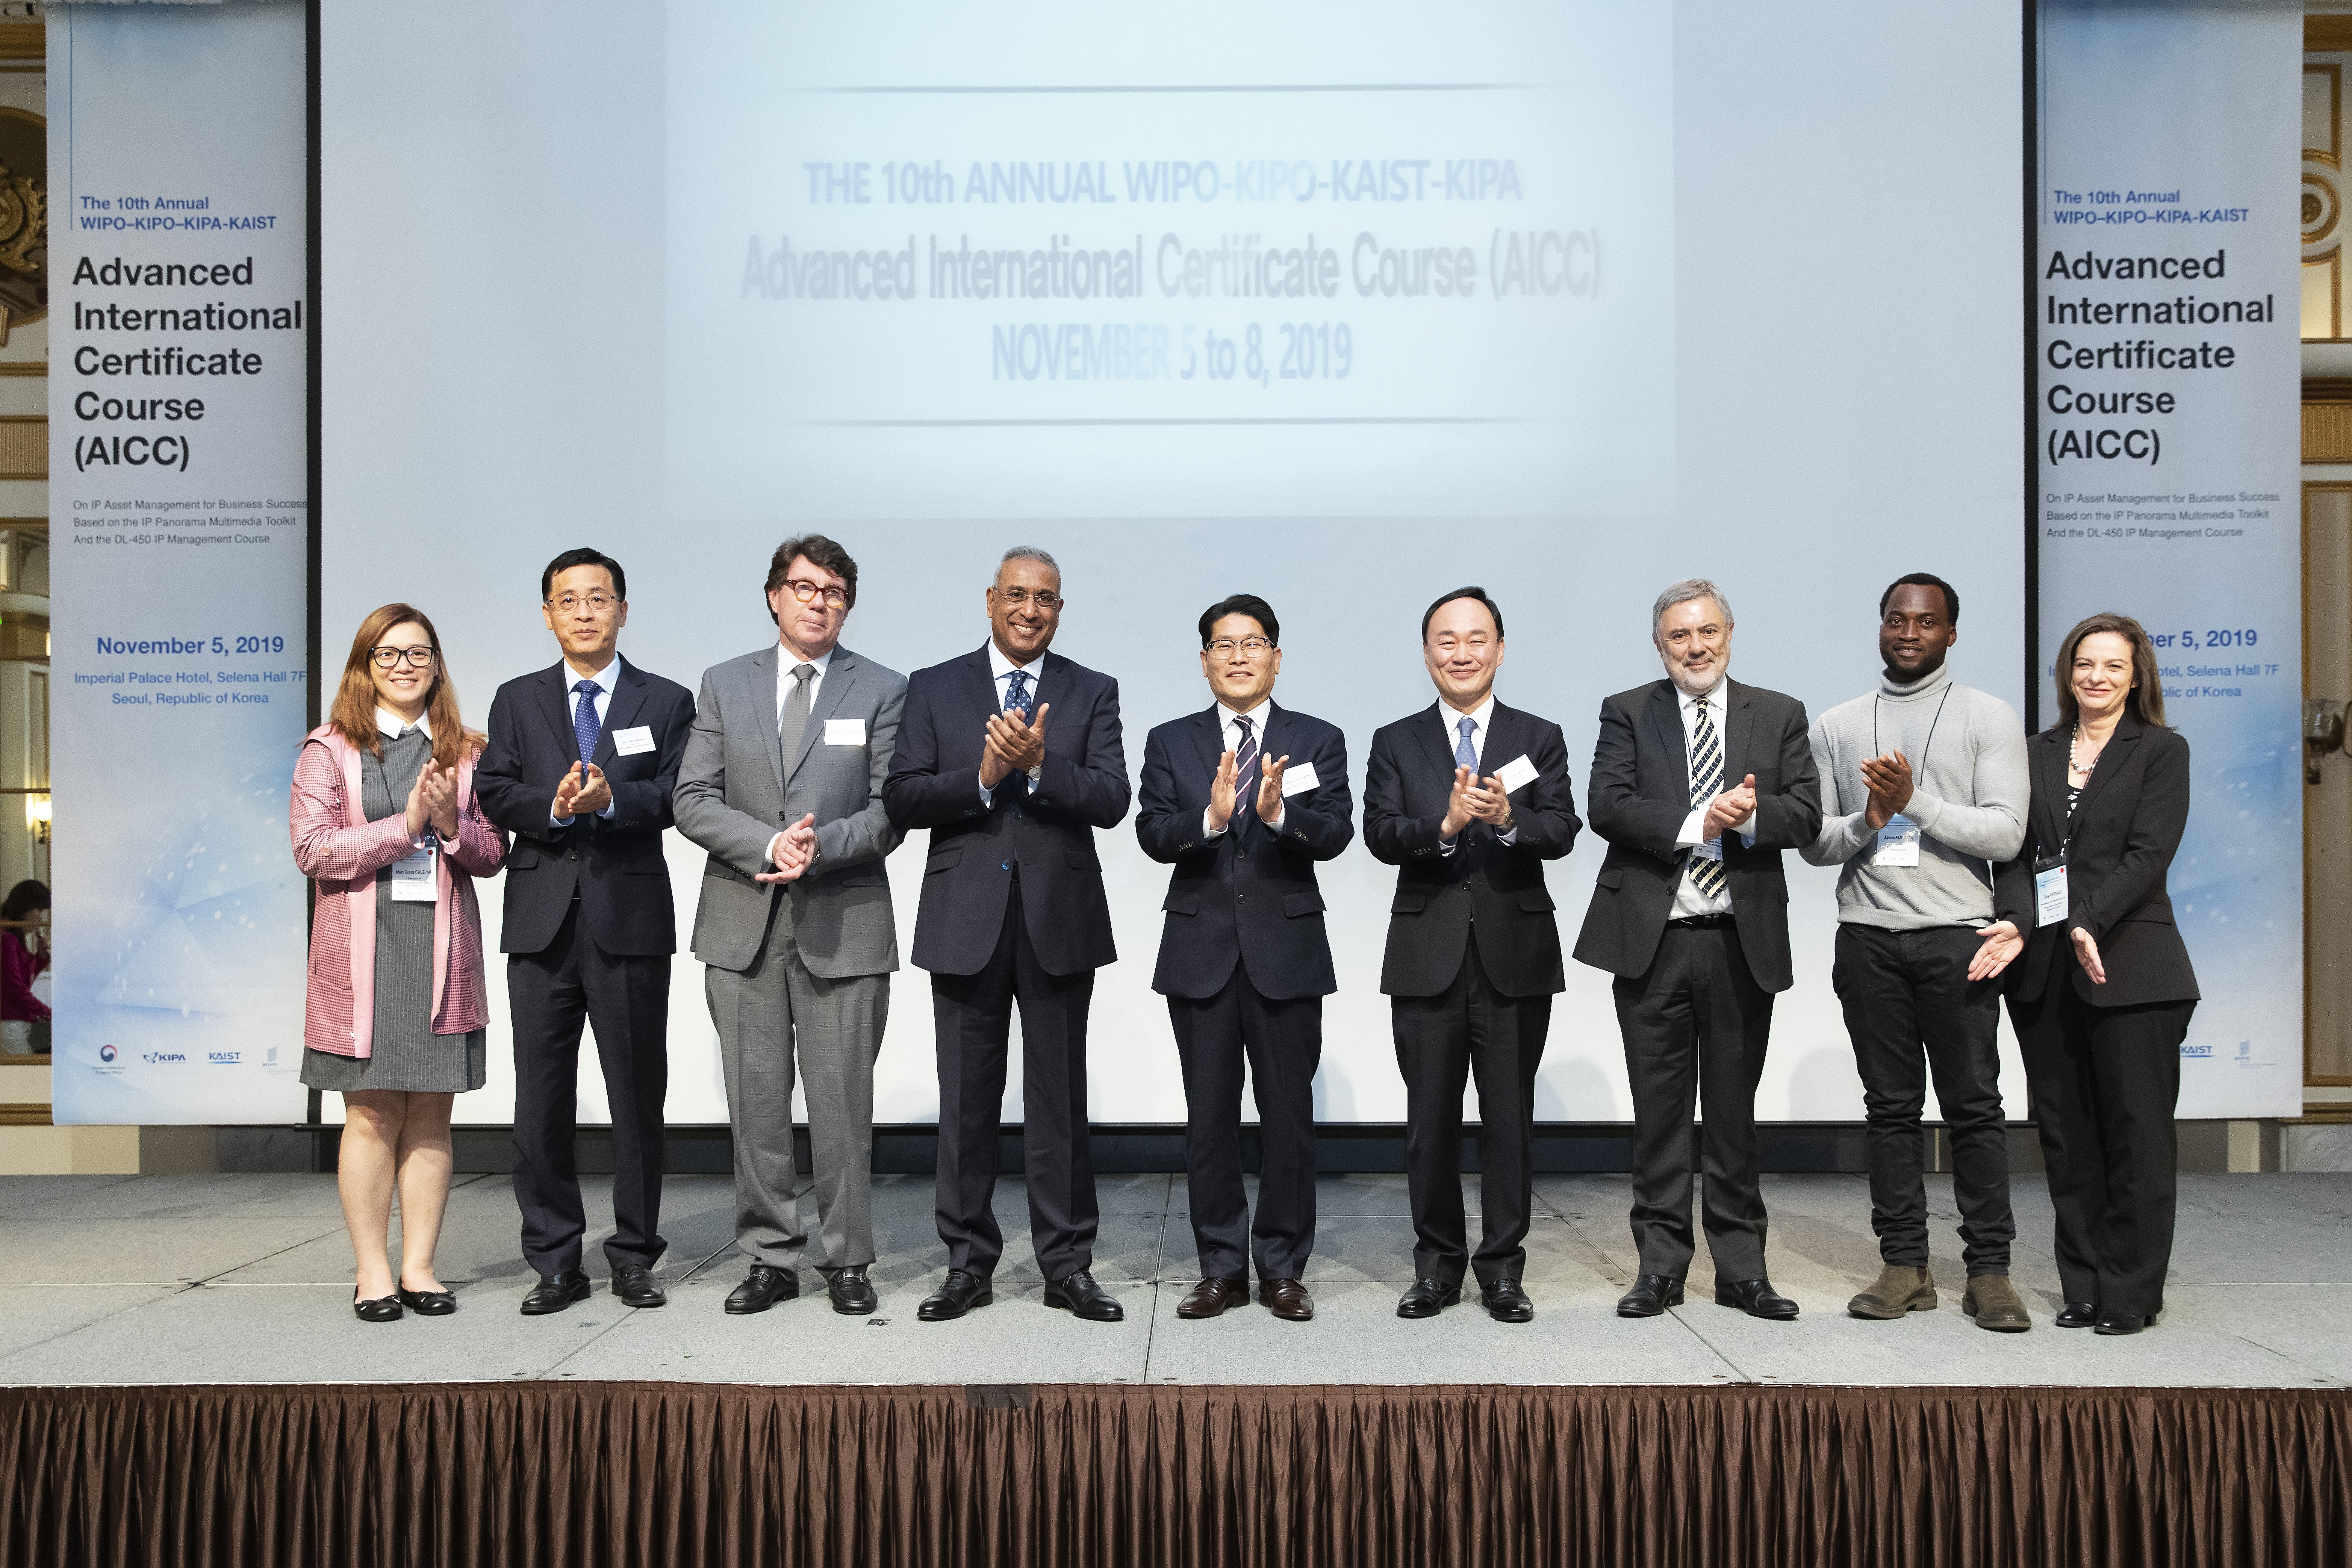 KIPO in collaboration with WIPO to educate and train global IP experts in the past 10 years